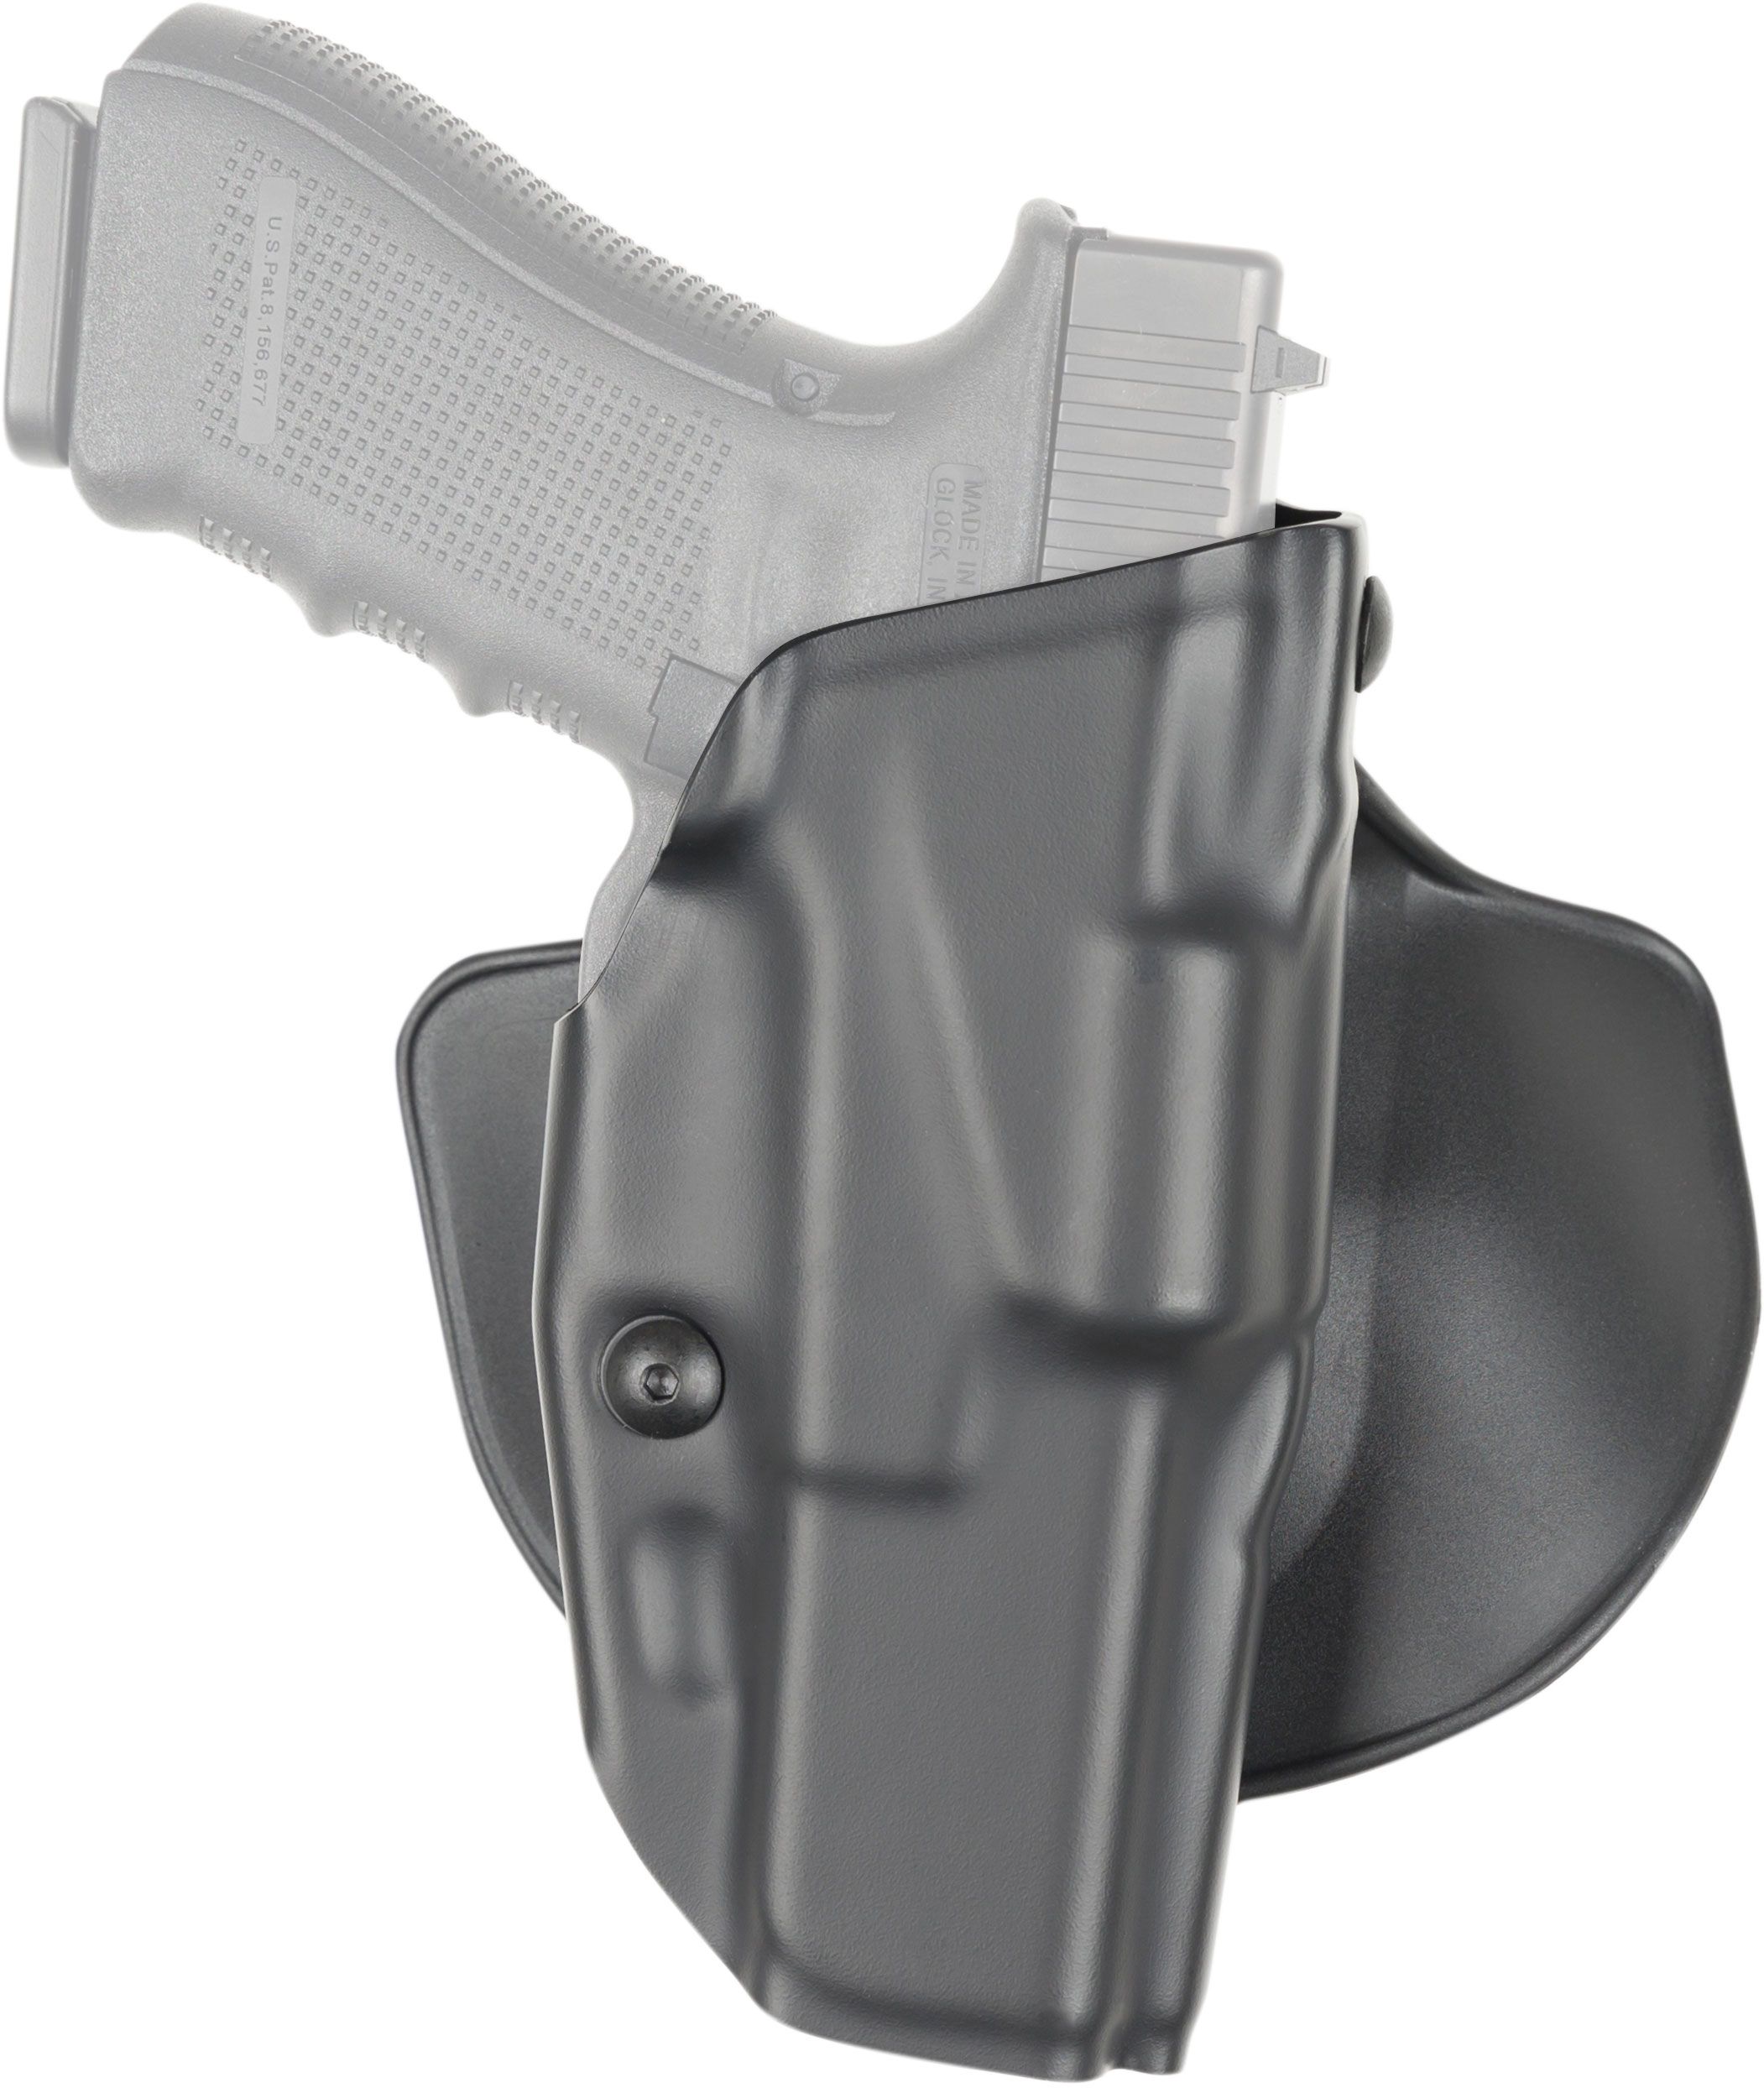 Safariland 6378 ALS Paddle Holster - STX Tactical Black Right : 6378-2832-131